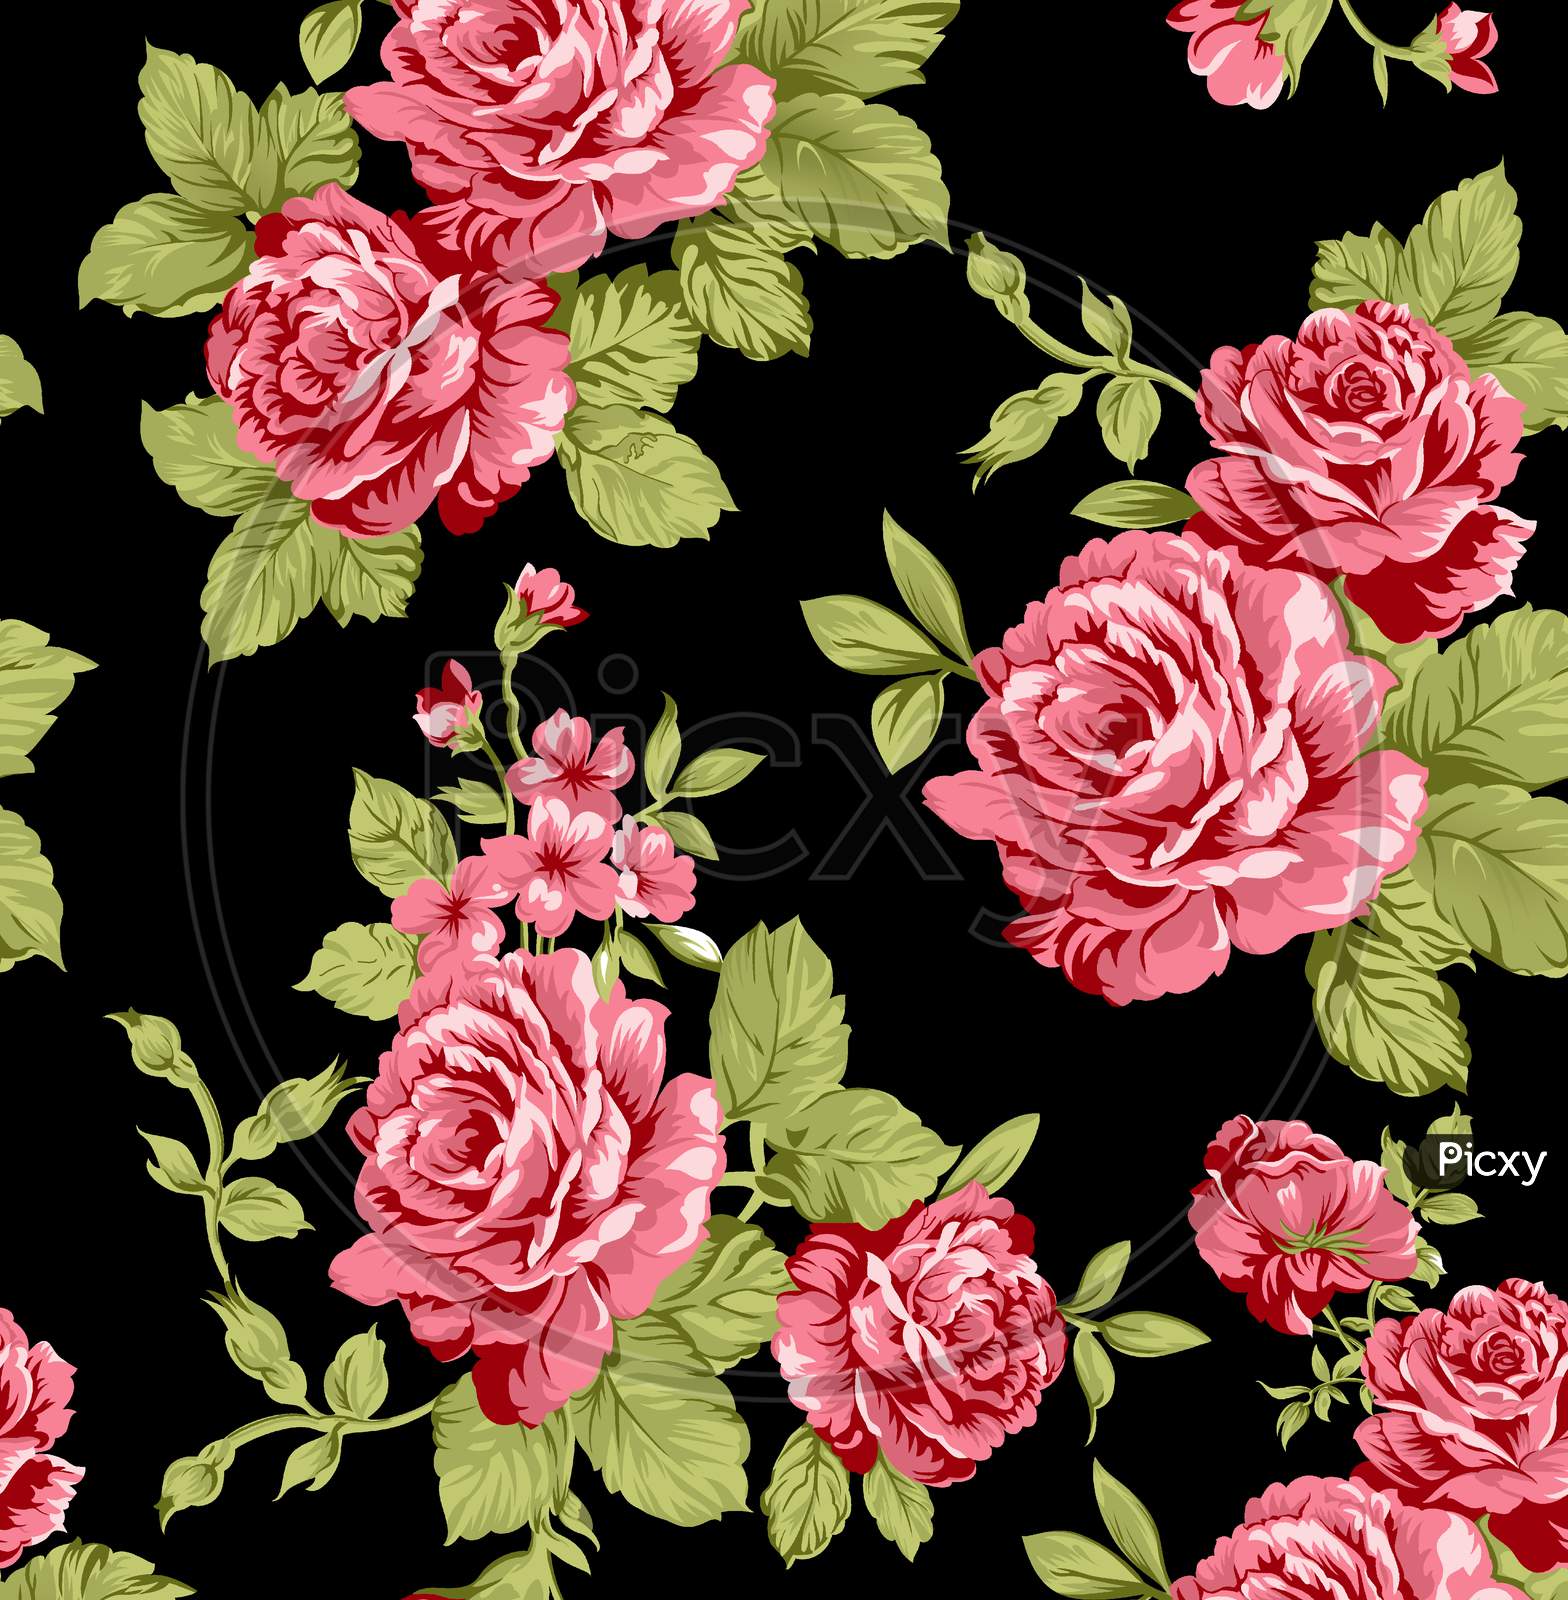 Image Of Seamless Floral Pattern With Of Red And Pink Roses On Black Background Iv457006 Picxy